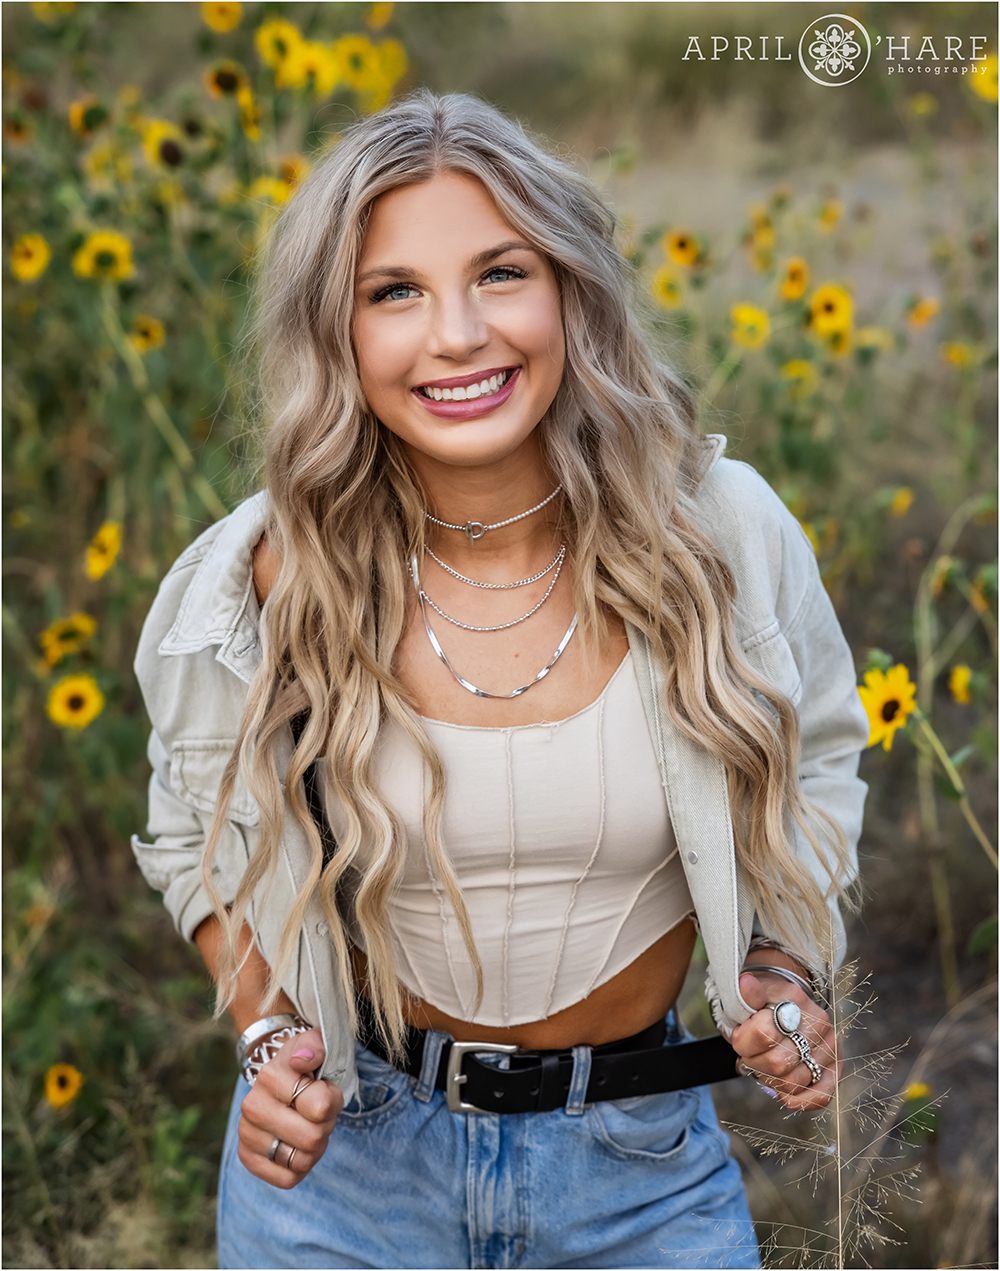 A high school girl with long blonde wavy hair wearing blue jeans and a tan jean jacket poses in front of some pretty sunflowers in Denver Colorado